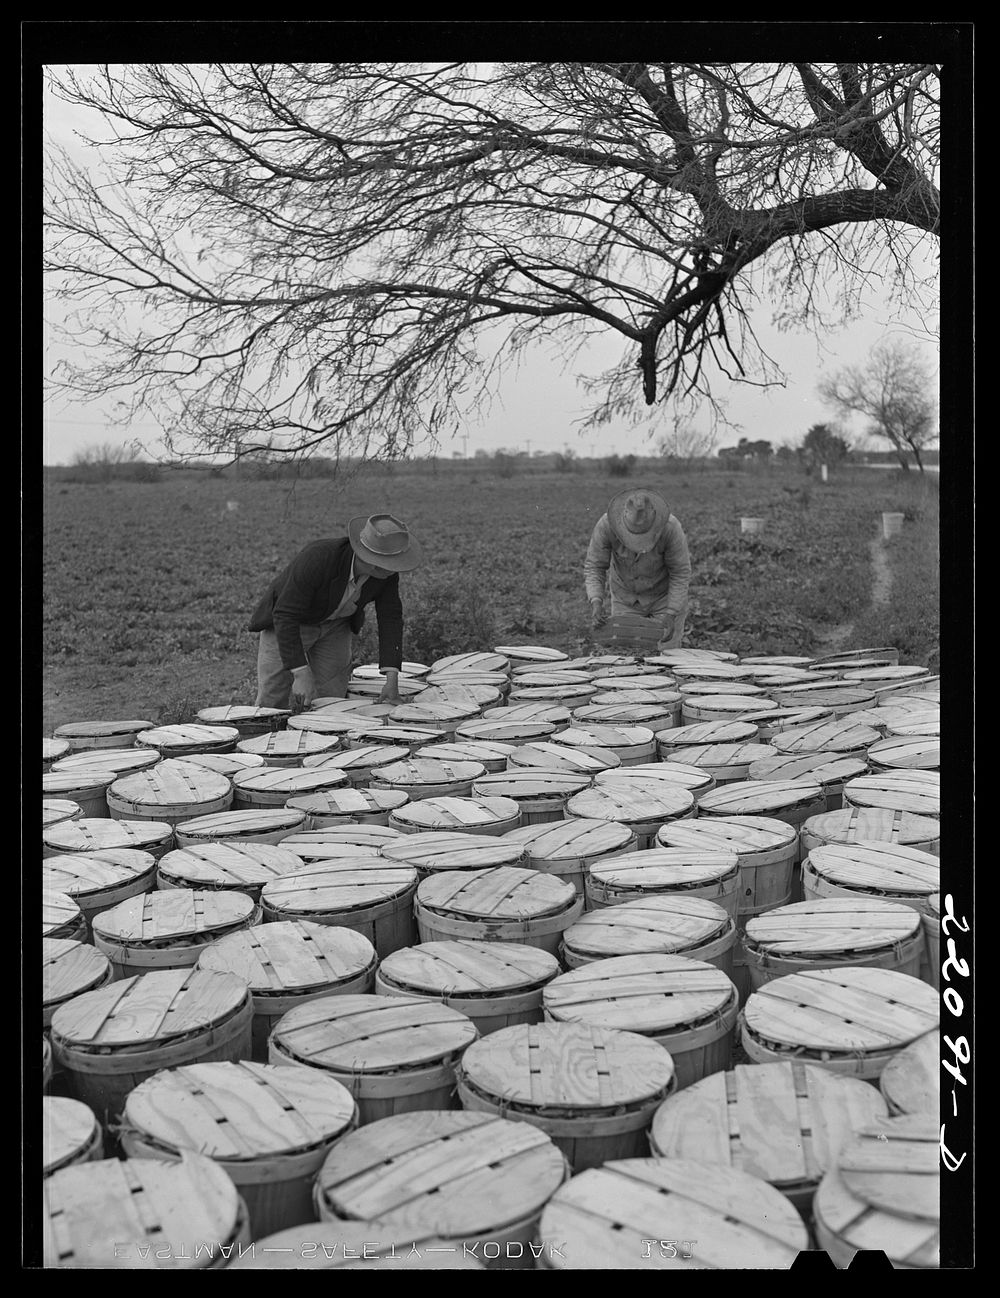 Brownsville, Texas (vicinity). Bean crop on a farm. Sourced from the Library of Congress.